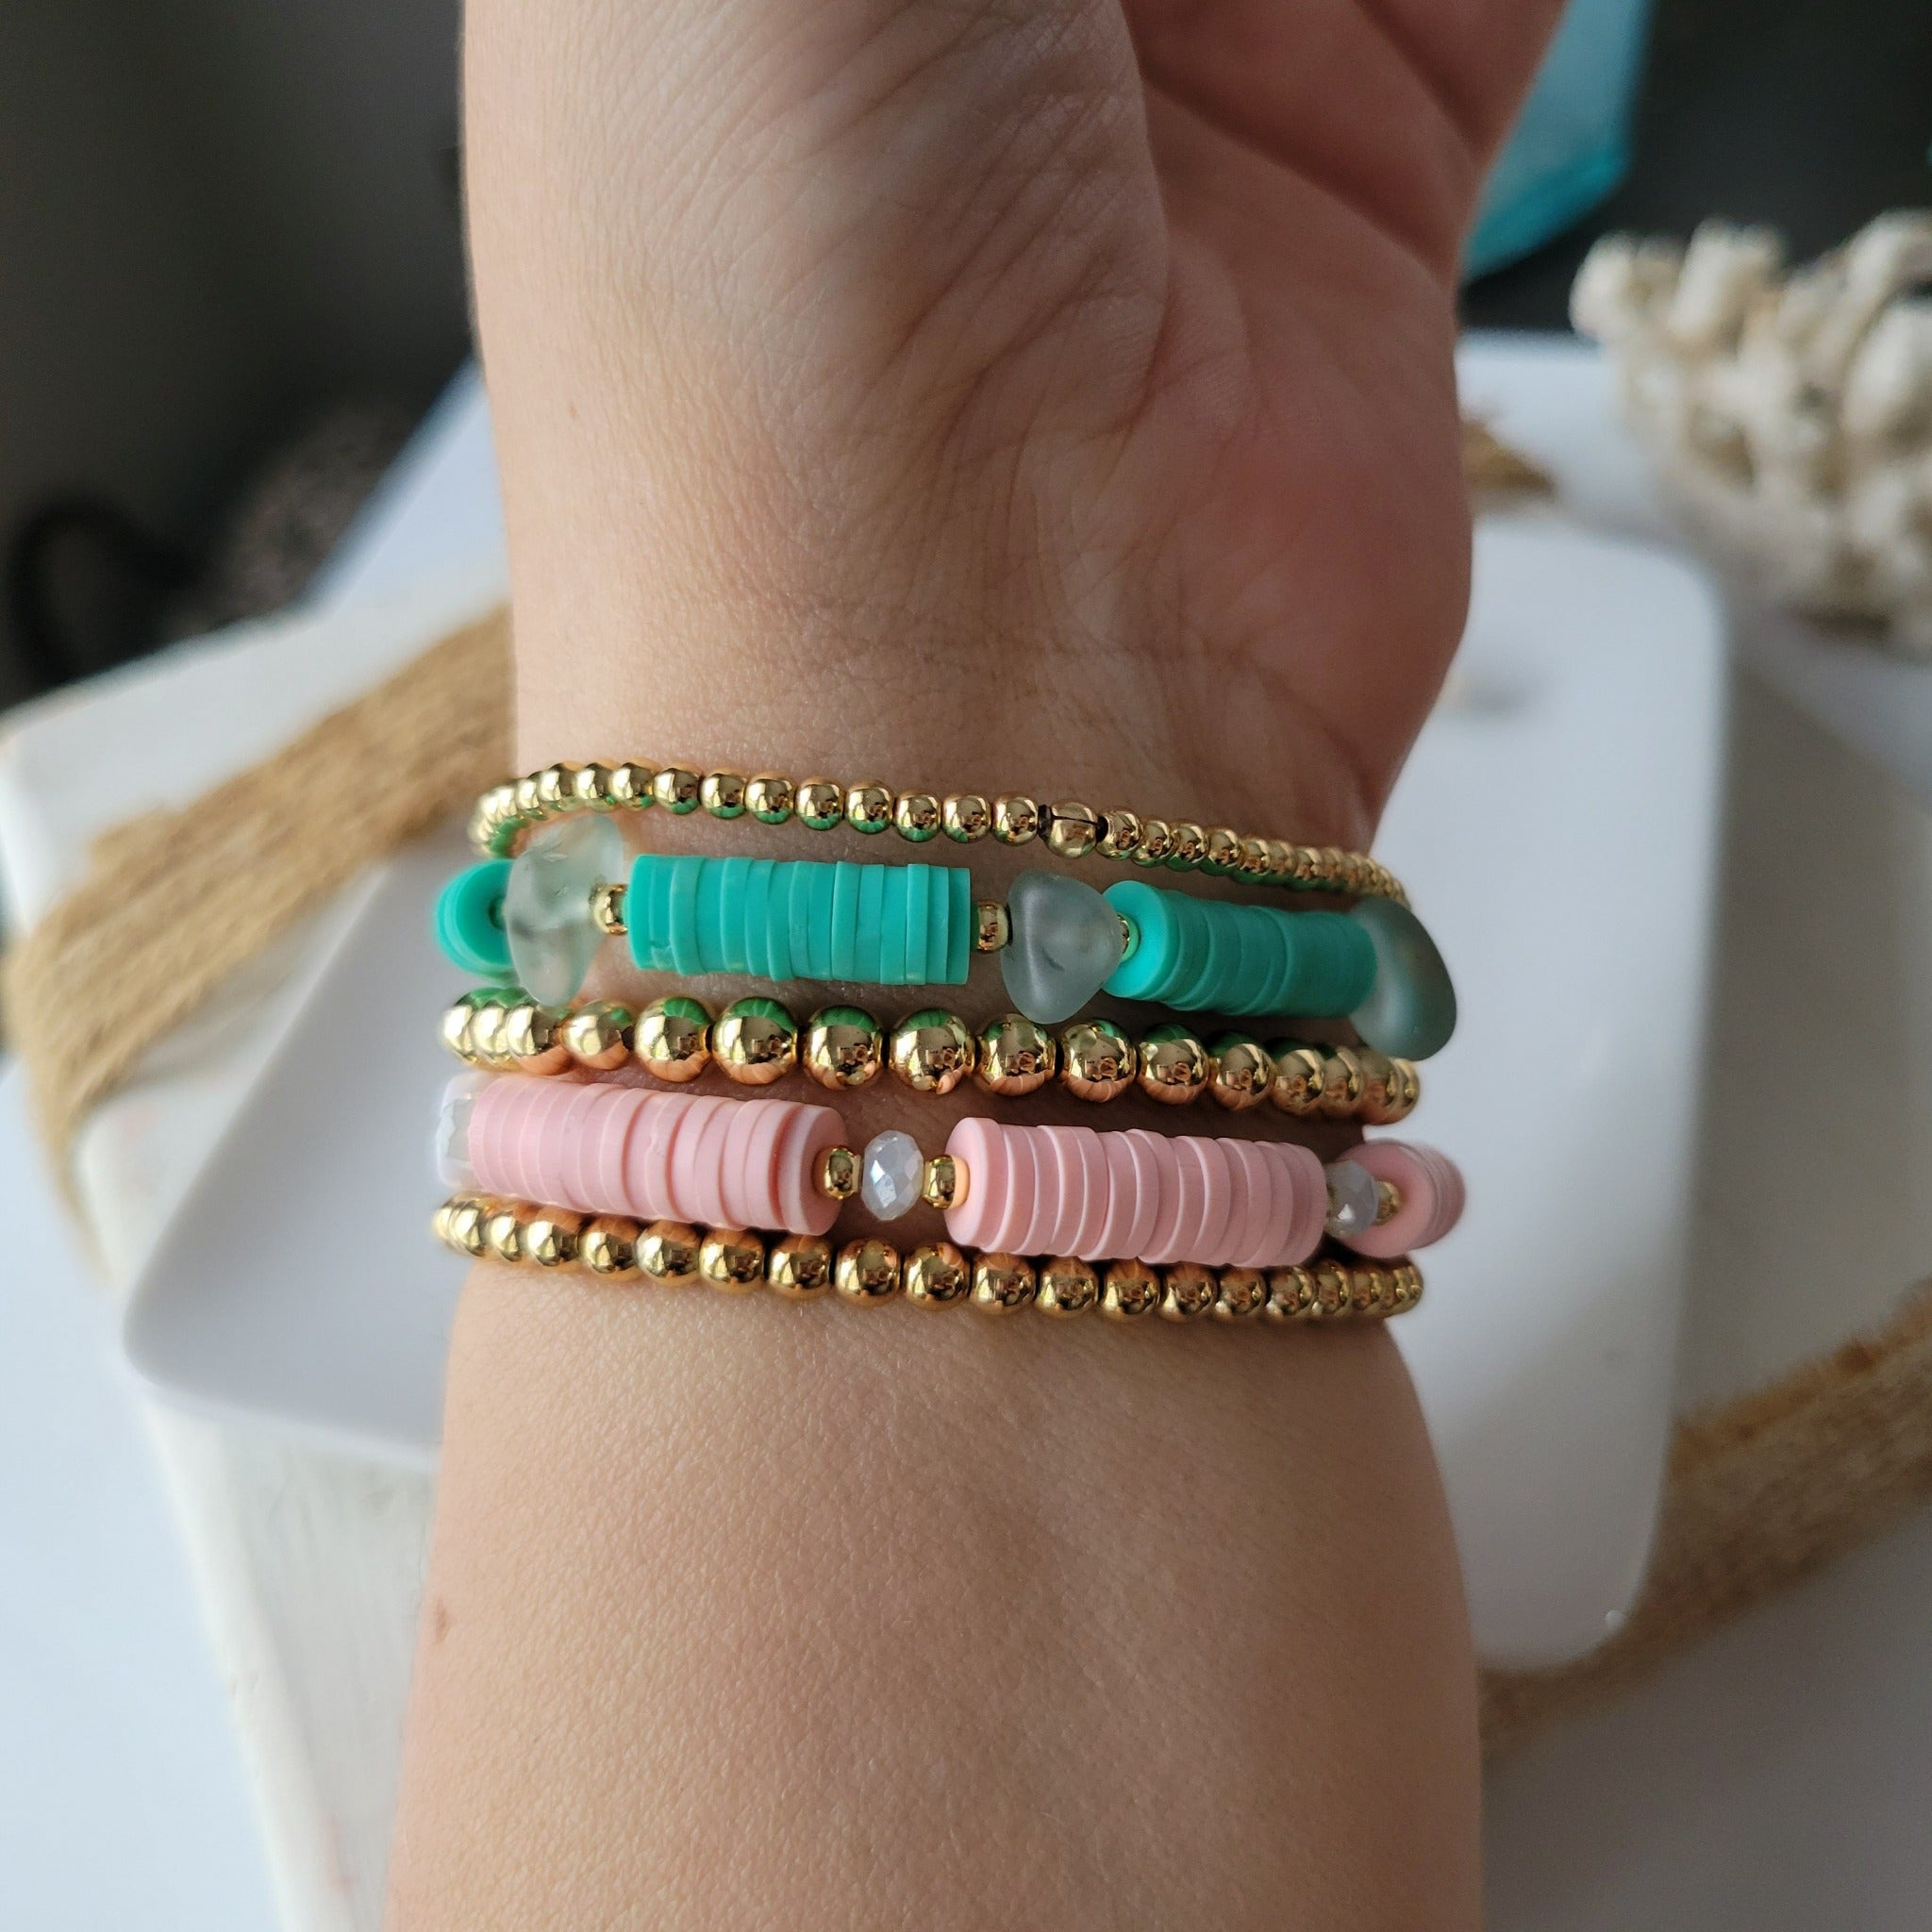 Clay Bead Stacking Bracelet Turquoise